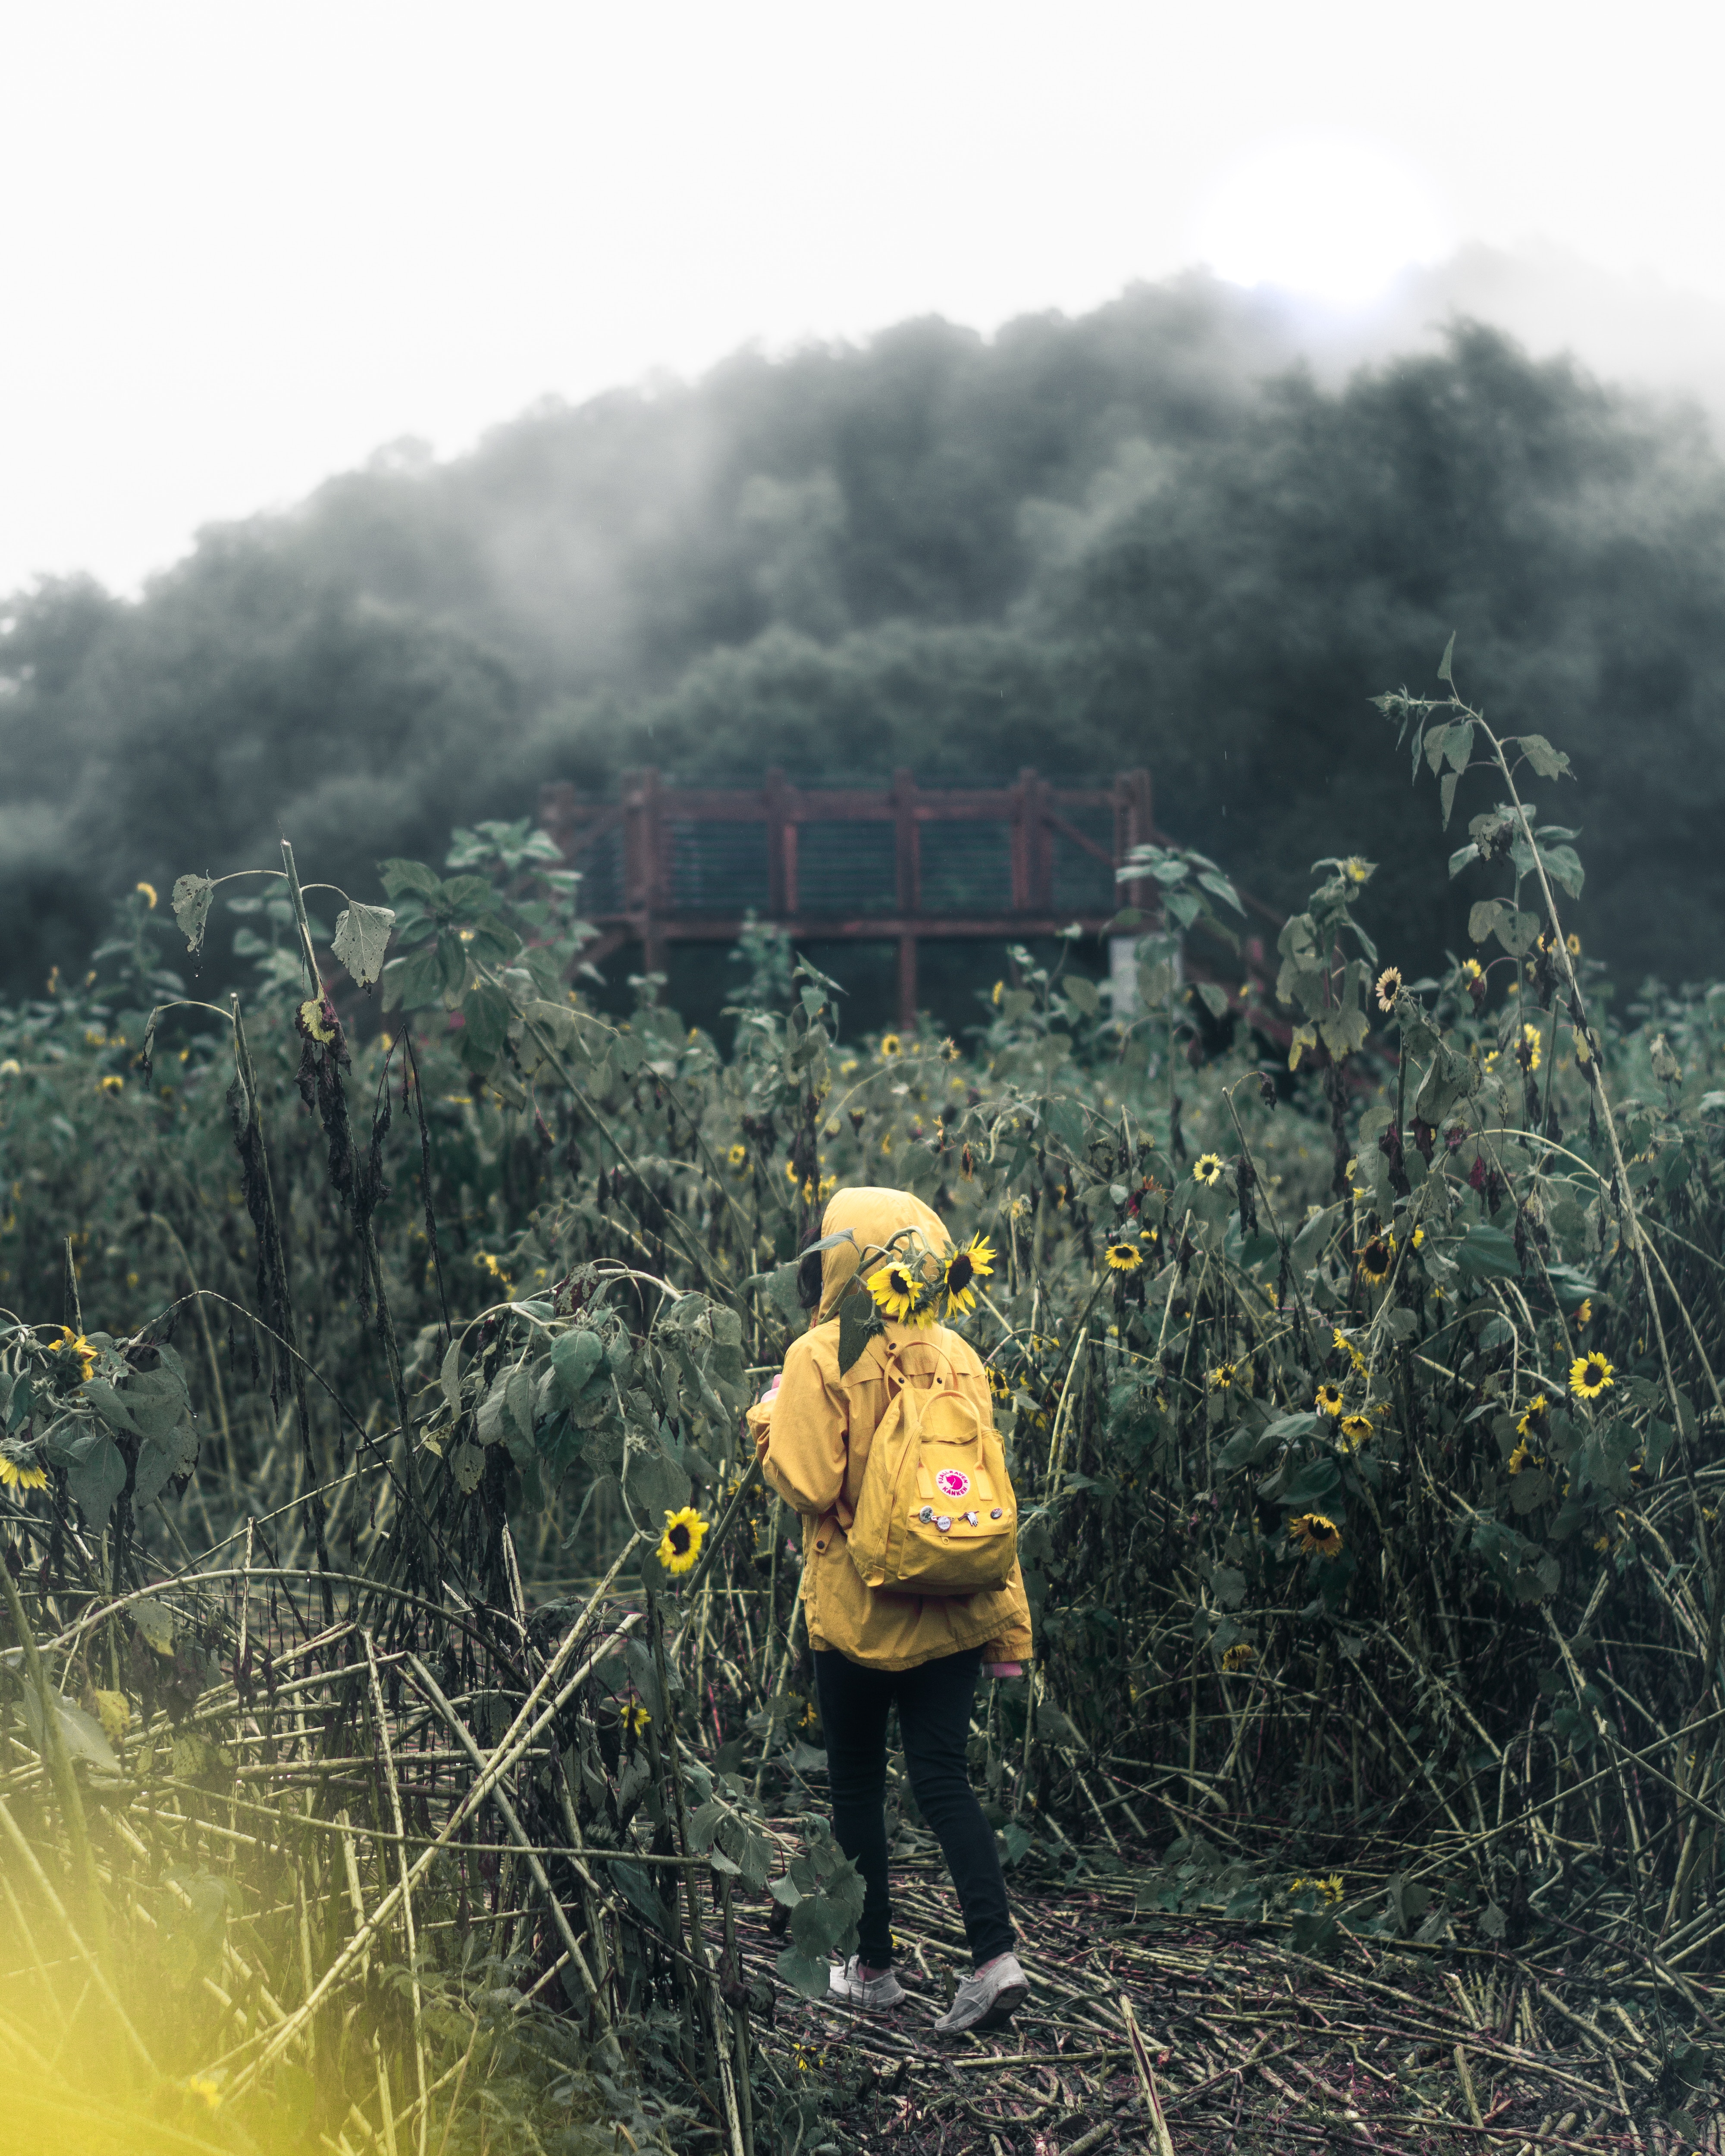 backpack, person, nature, flowers, clouds, field, human, mainly cloudy, overcast, rucksack